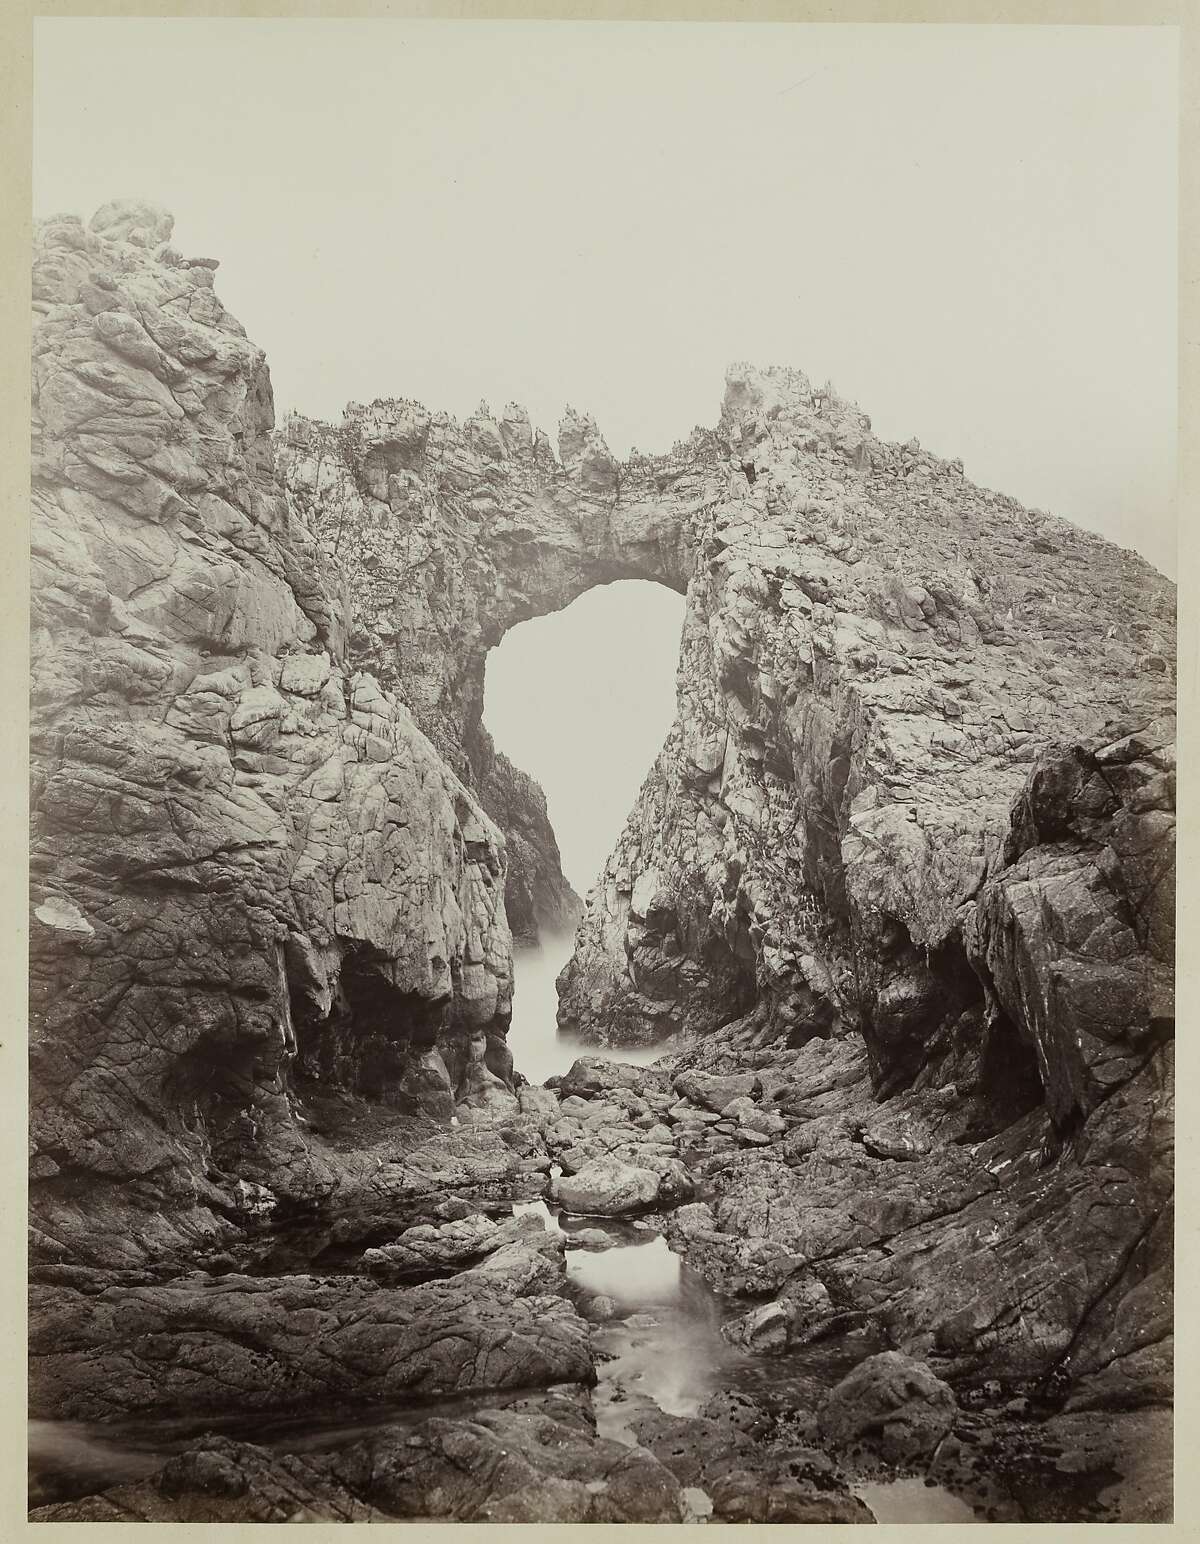 "Arch at the West End, Farallones" (1868 1869) Albumen print by Carleton Watkins,from the album Photographs of the Pacific Coast. Lent by Department of Special Collections, Stanford University Libraries